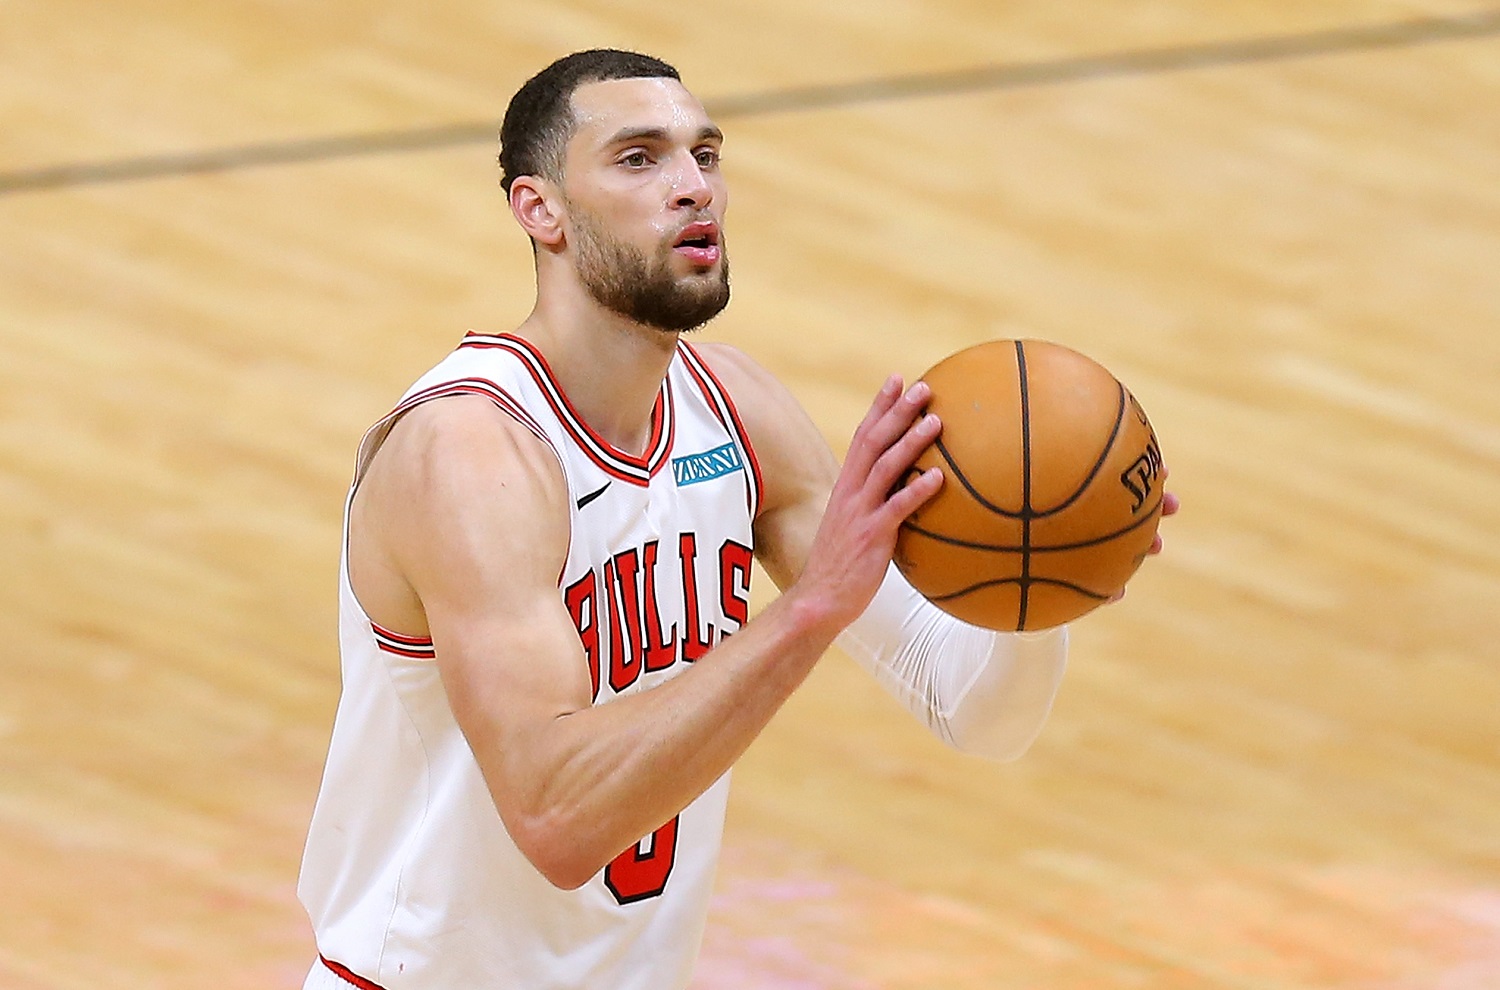 Zach LaVine of the Chicago Bulls shoots against the New Orleans Pelicans during the second half on March 3, 2021 in New Orleans.